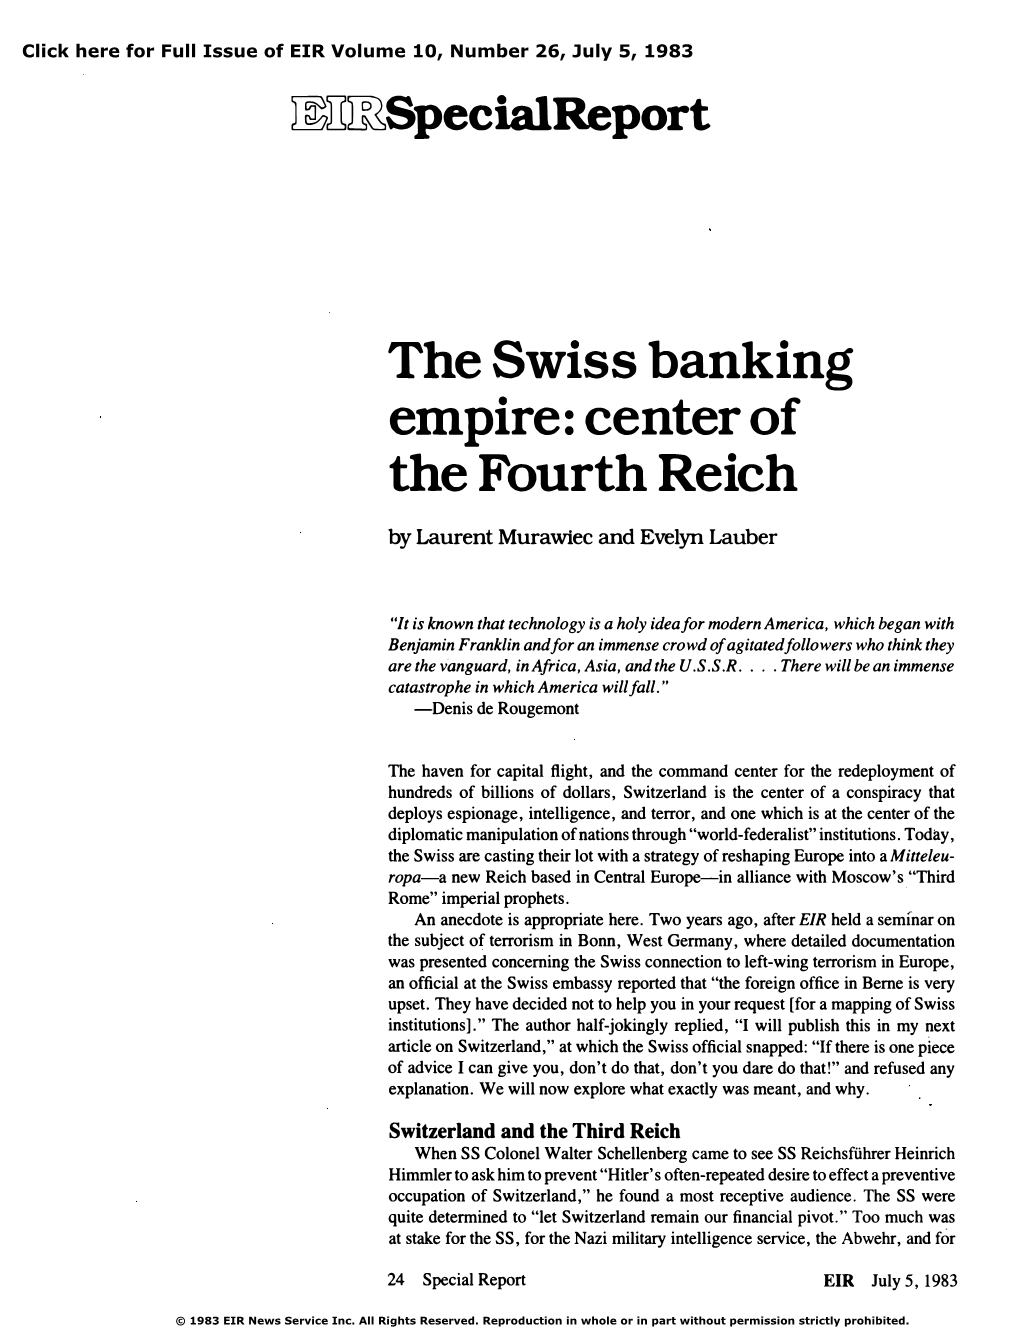 The Swiss Banking Empire: Center of the Fourth Reich